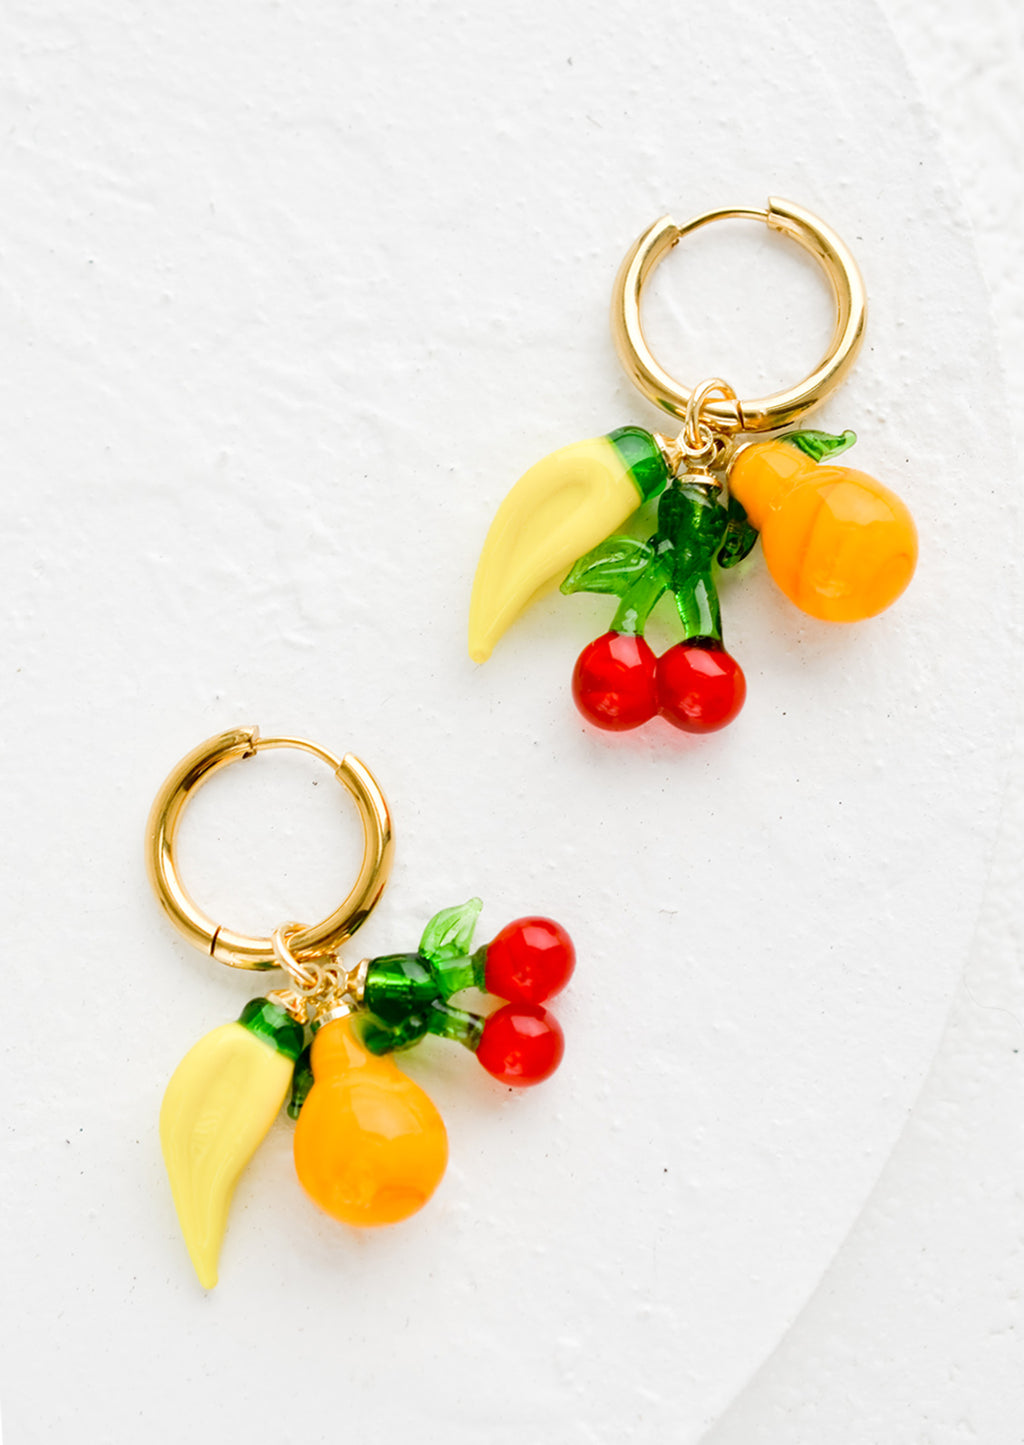 2: Gold hoop earrings with glass banana, cherry and orange fruit charms.